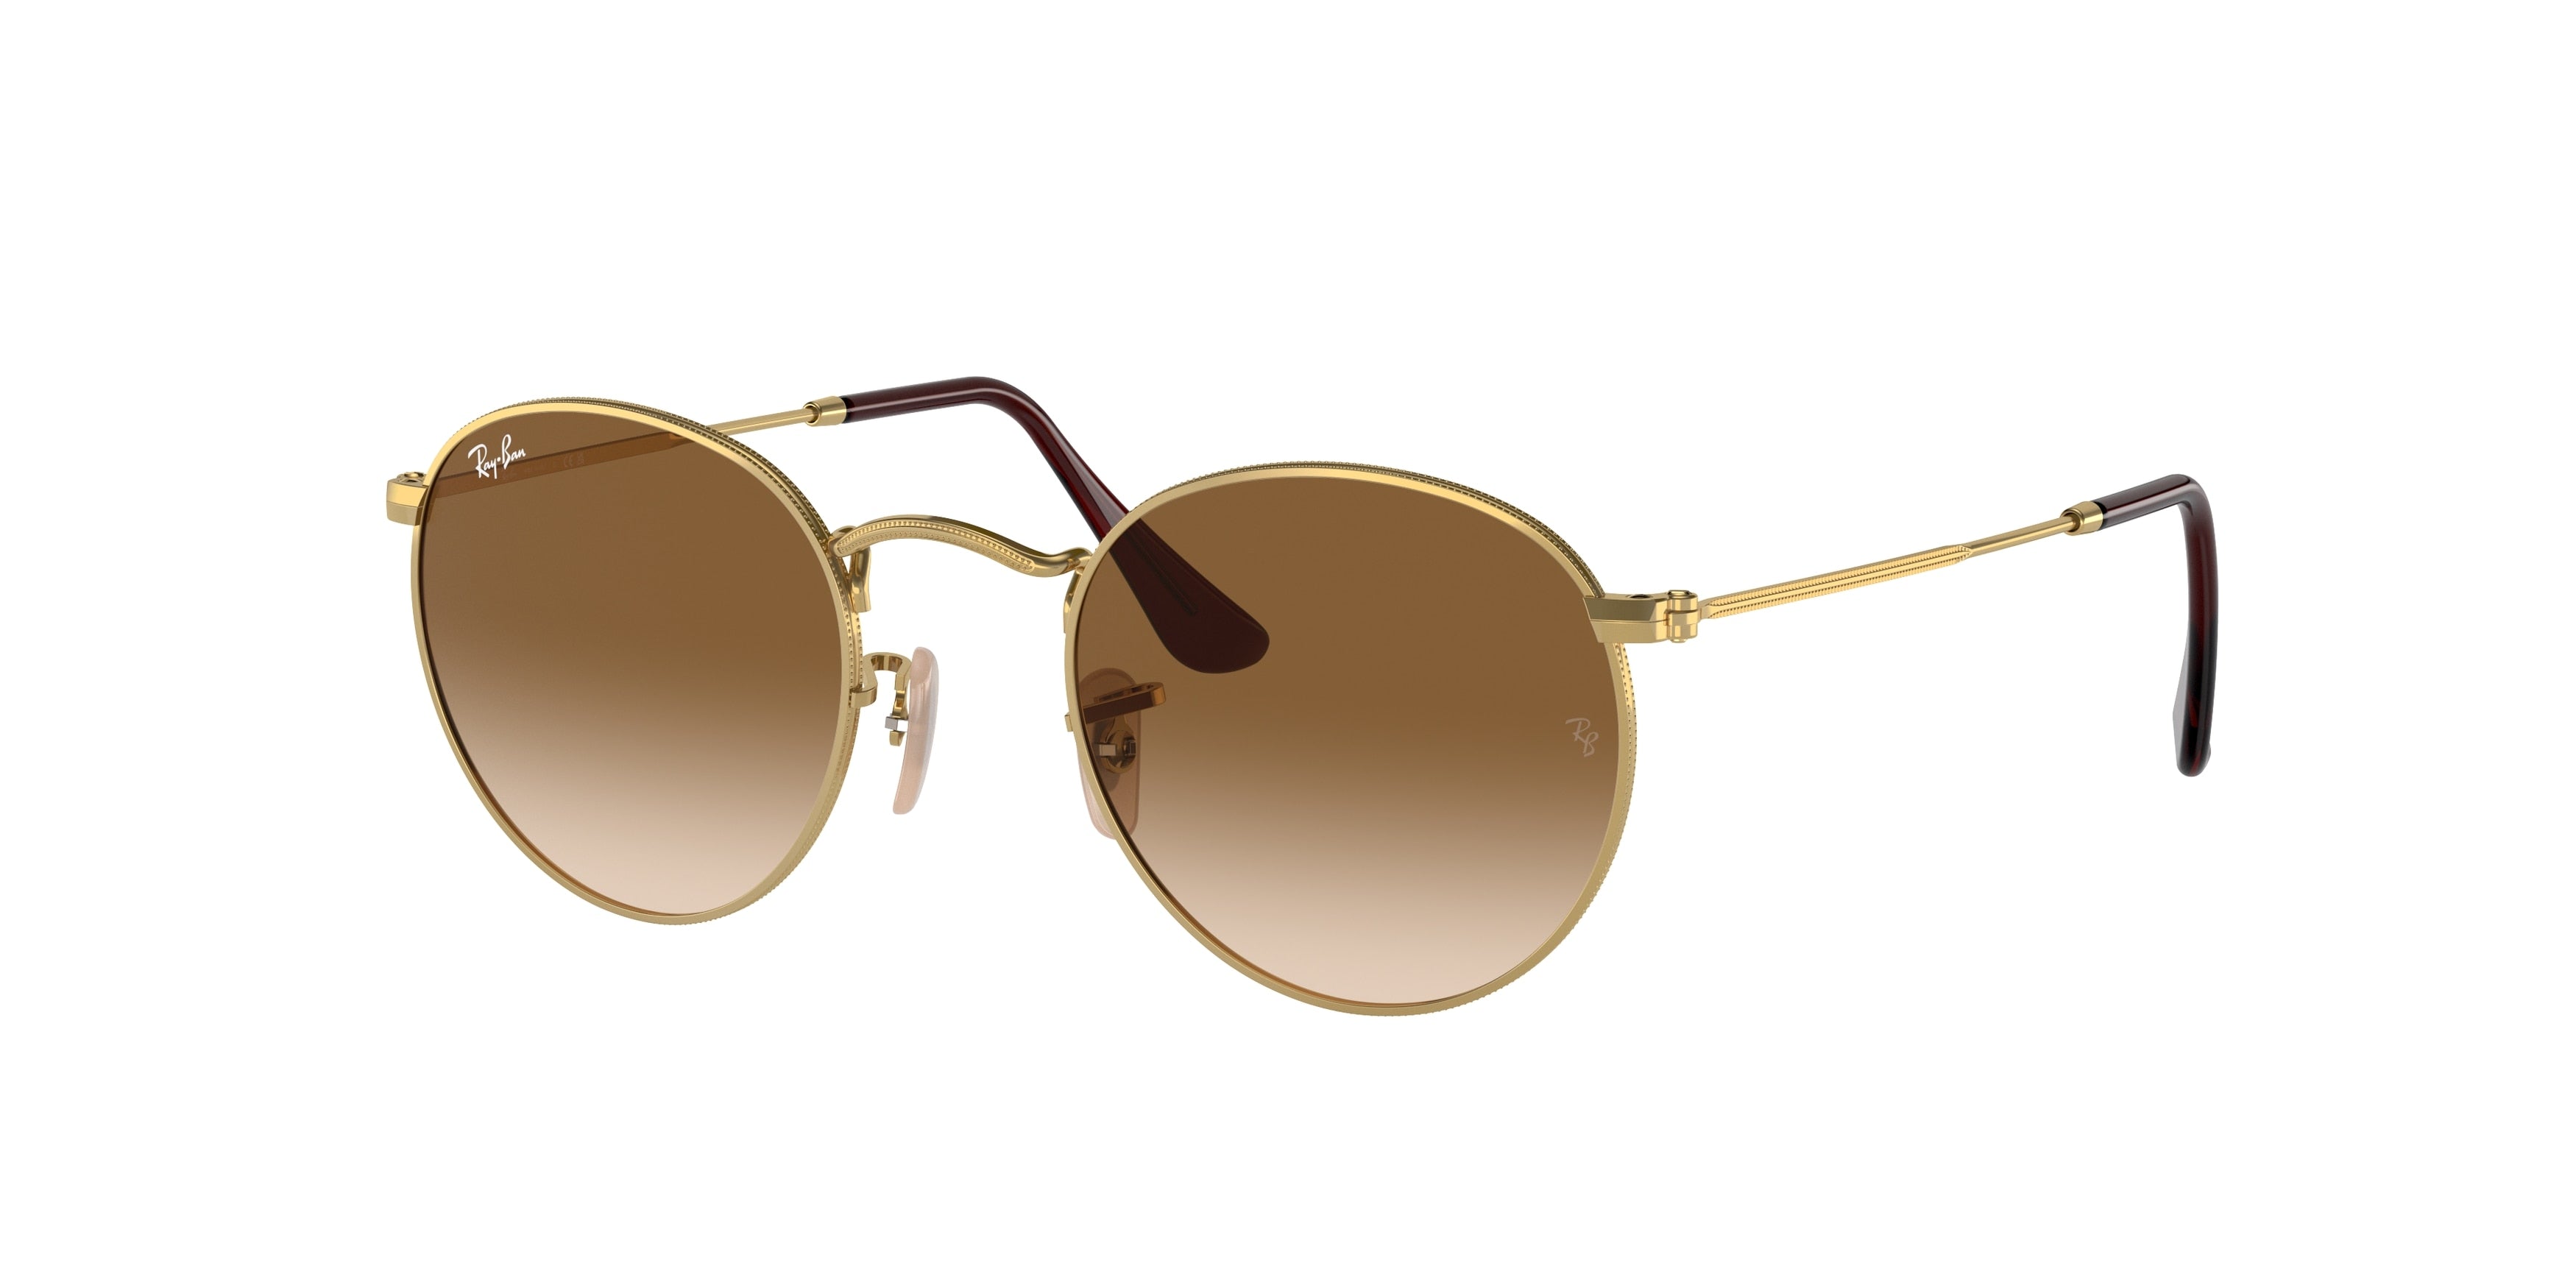 Ray-Ban ROUND METAL RB3447 Round Sunglasses  001/51-Gold 52-145-21 - Color Map Gold